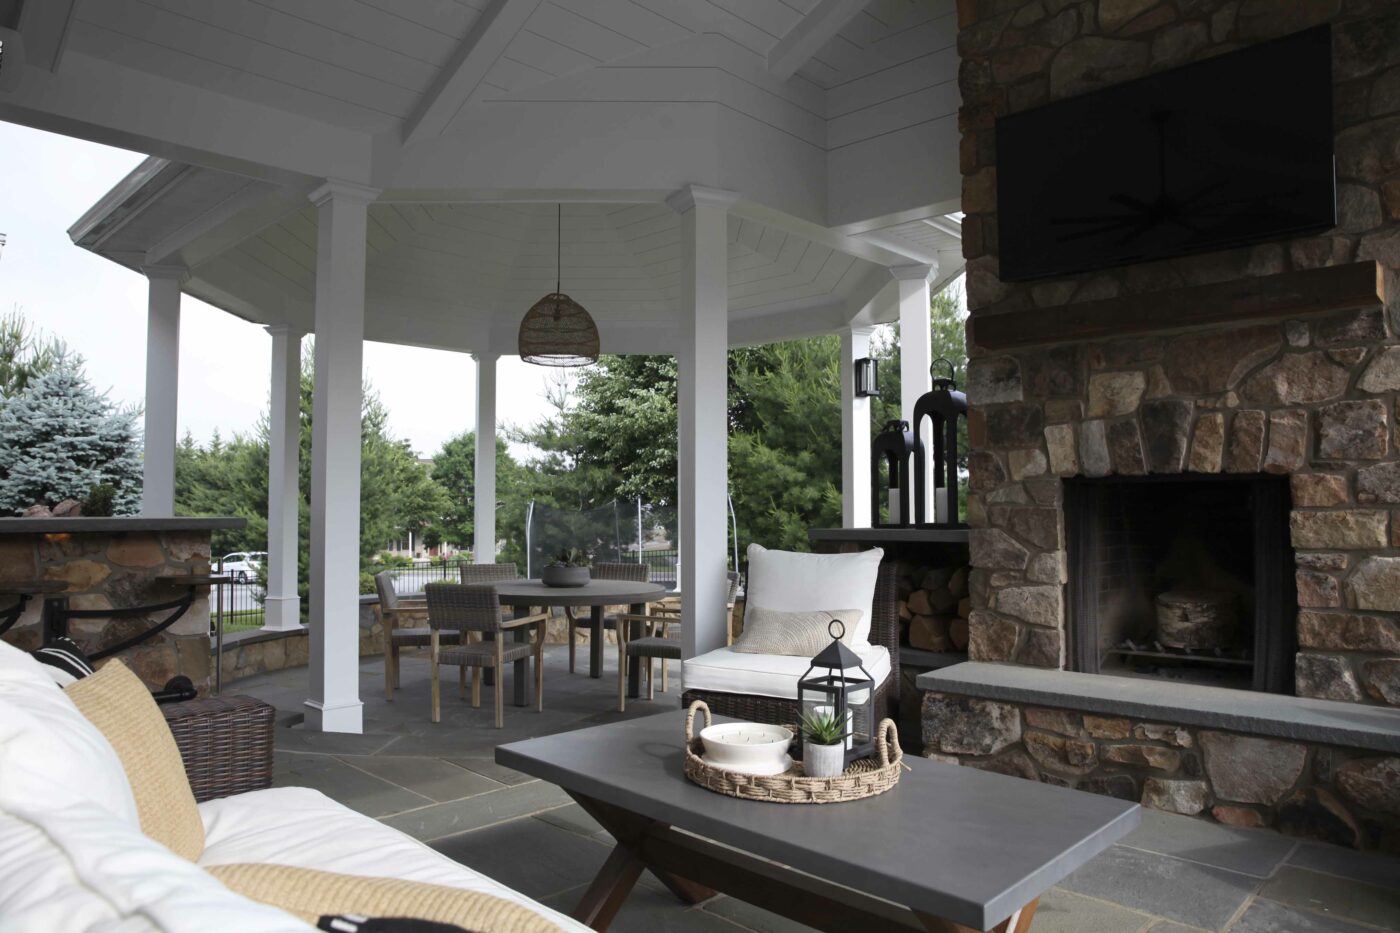 Patio outdoor Fireplace W Covered eating area